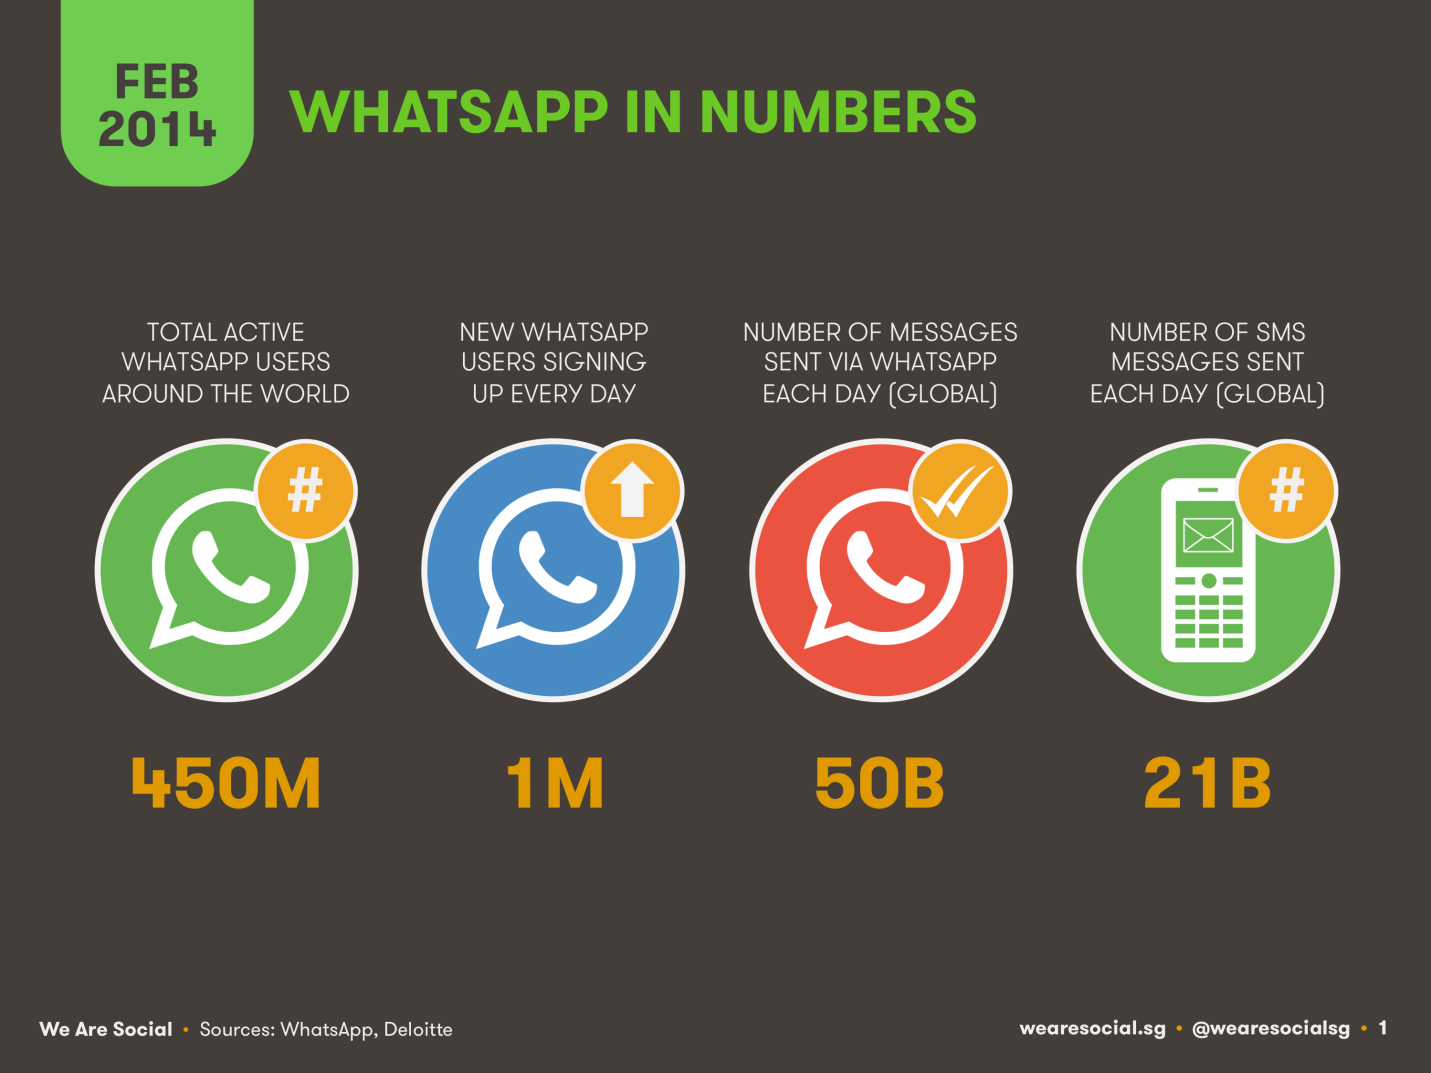 Although WhatsApp's figures are impressive, the market contains a numb...